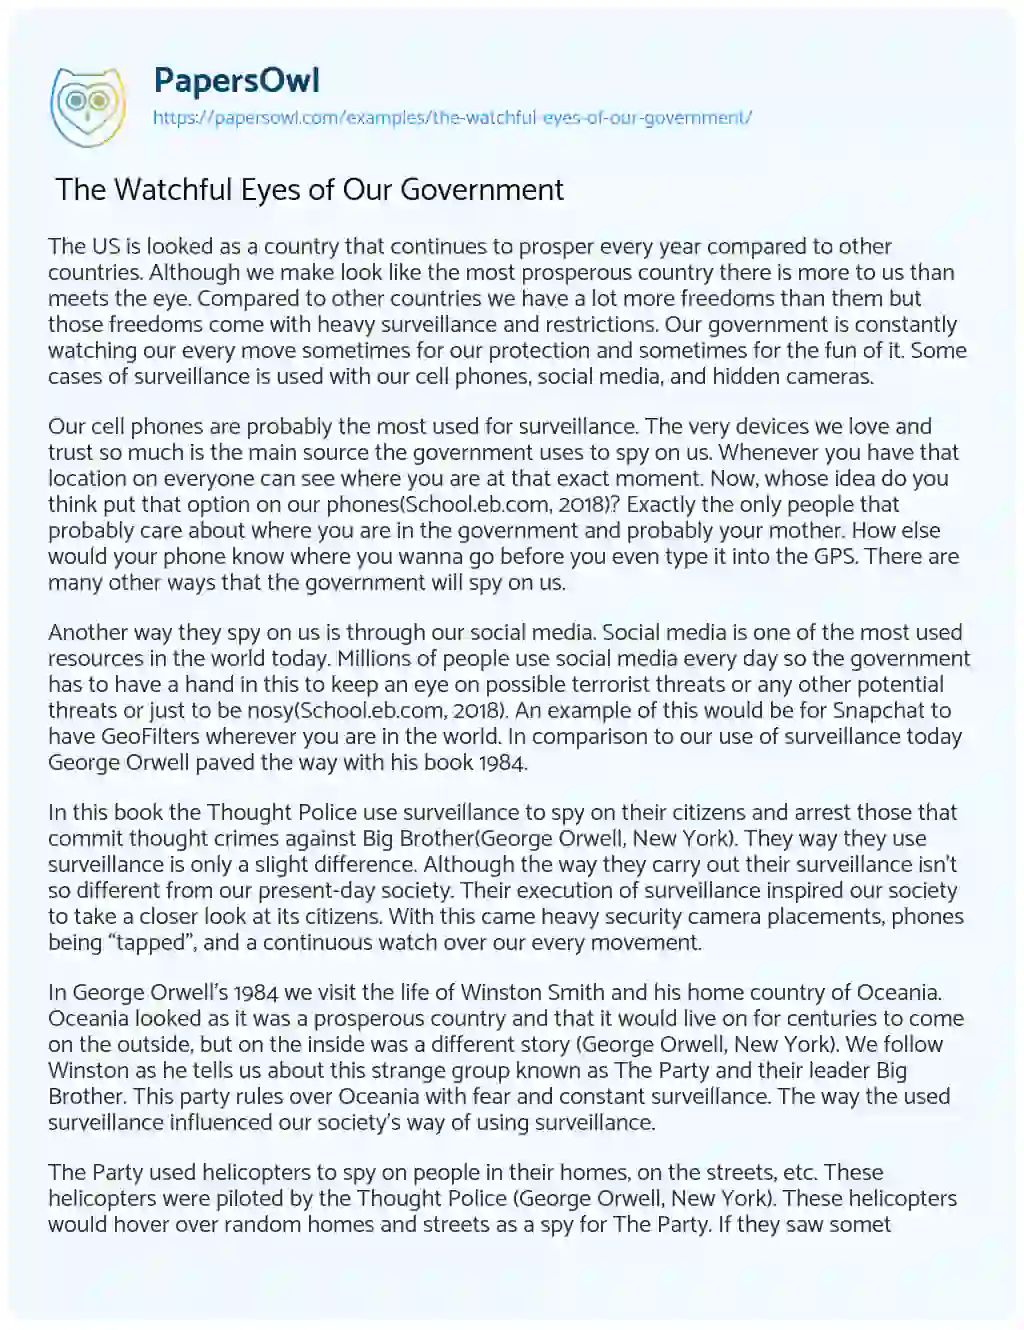 Essay on  The Watchful Eyes of our Government 